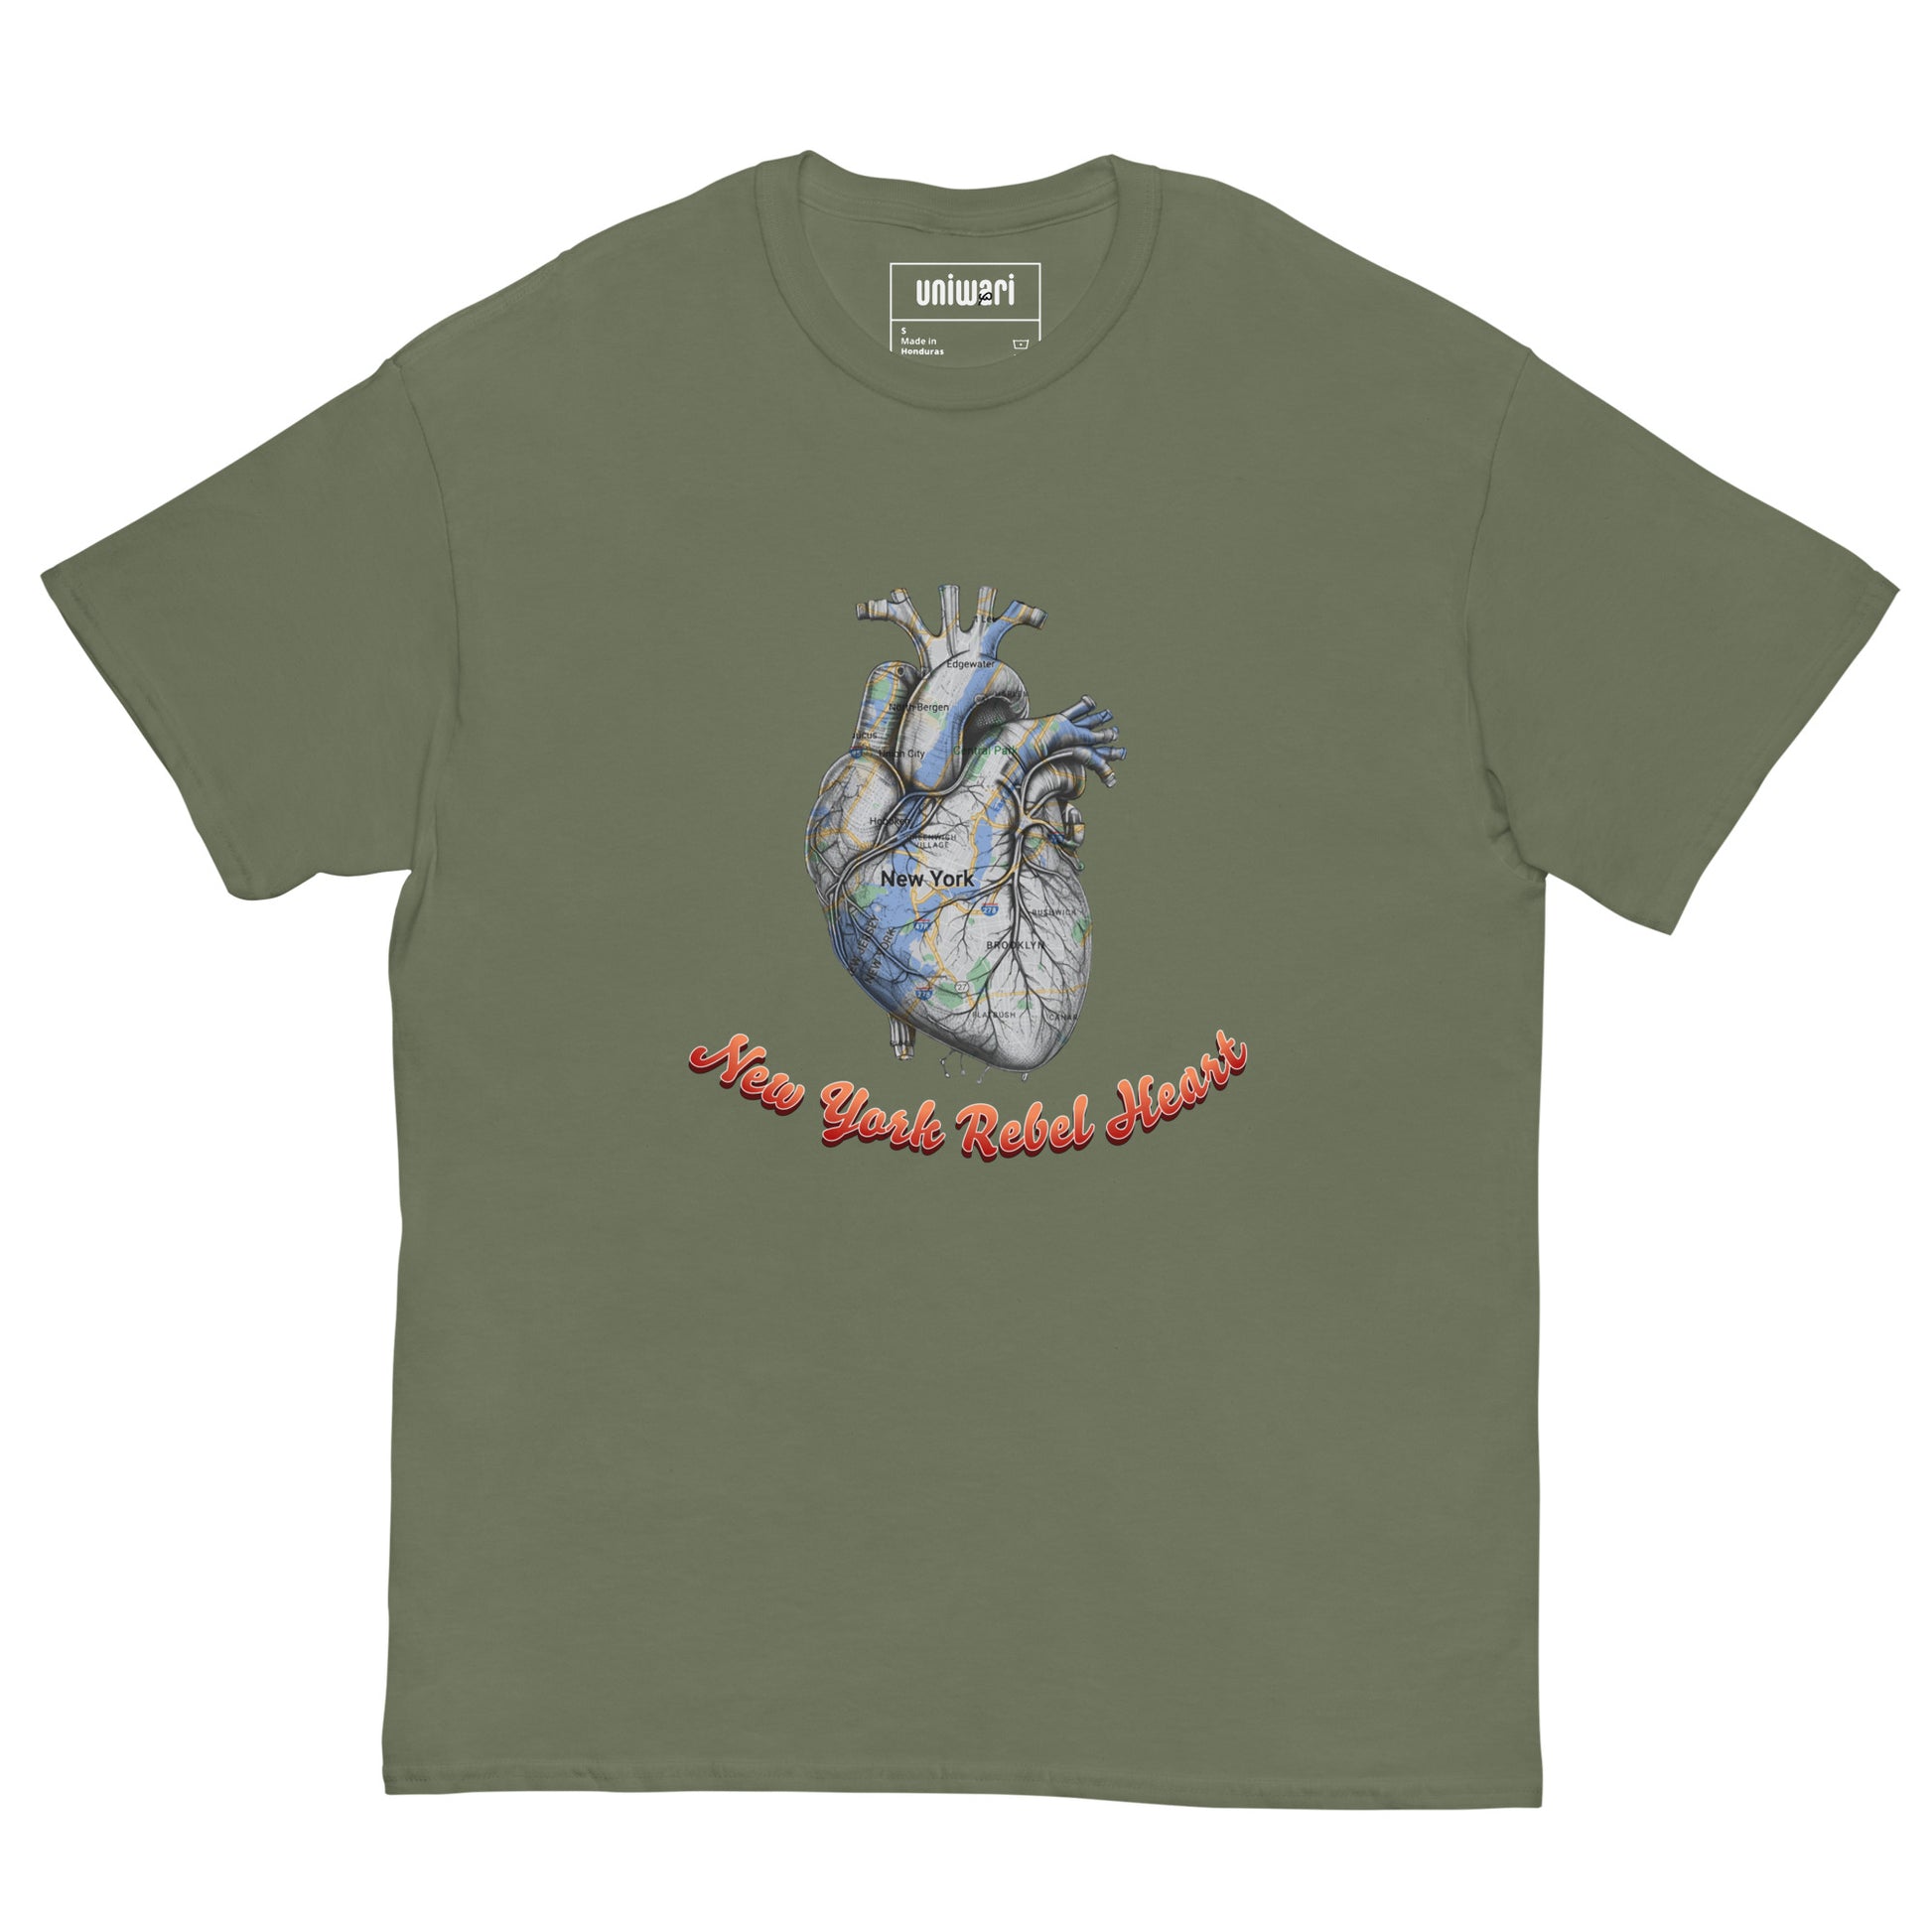 Green High Quality Tee - Front Design with a Heart Shaped Map of New York and a Phrase "New York Rebel Heart" print